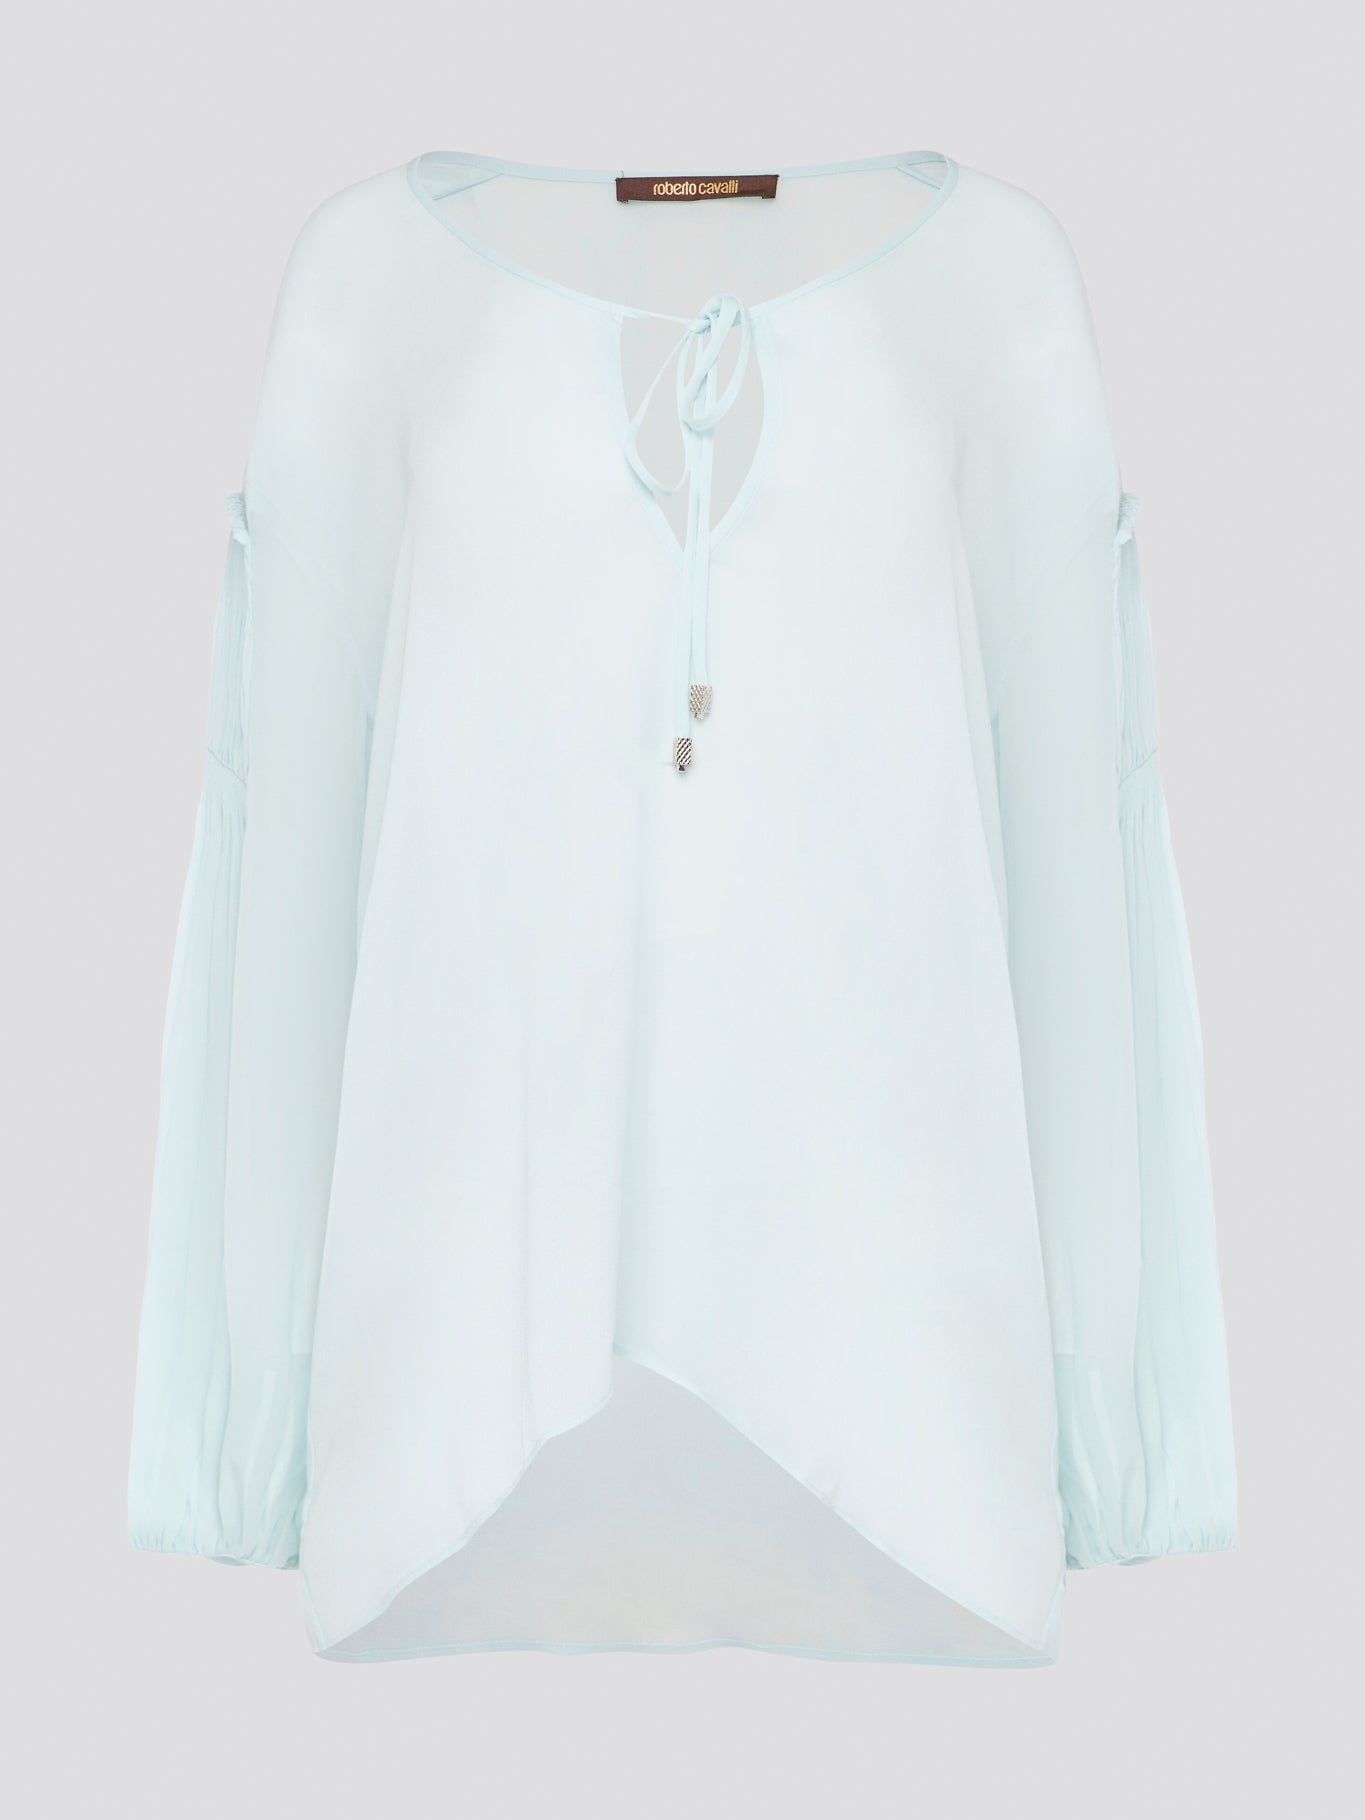 Step up your fashion game with this stunning Mint Green Tie Front Blouse by Roberto Cavalli. The delicate mint green hue and flattering tie front detail will make you stand out in any crowd. Pair it with your favorite jeans for a casual daytime look or dress it up with some sleek trousers for a night out on the town.